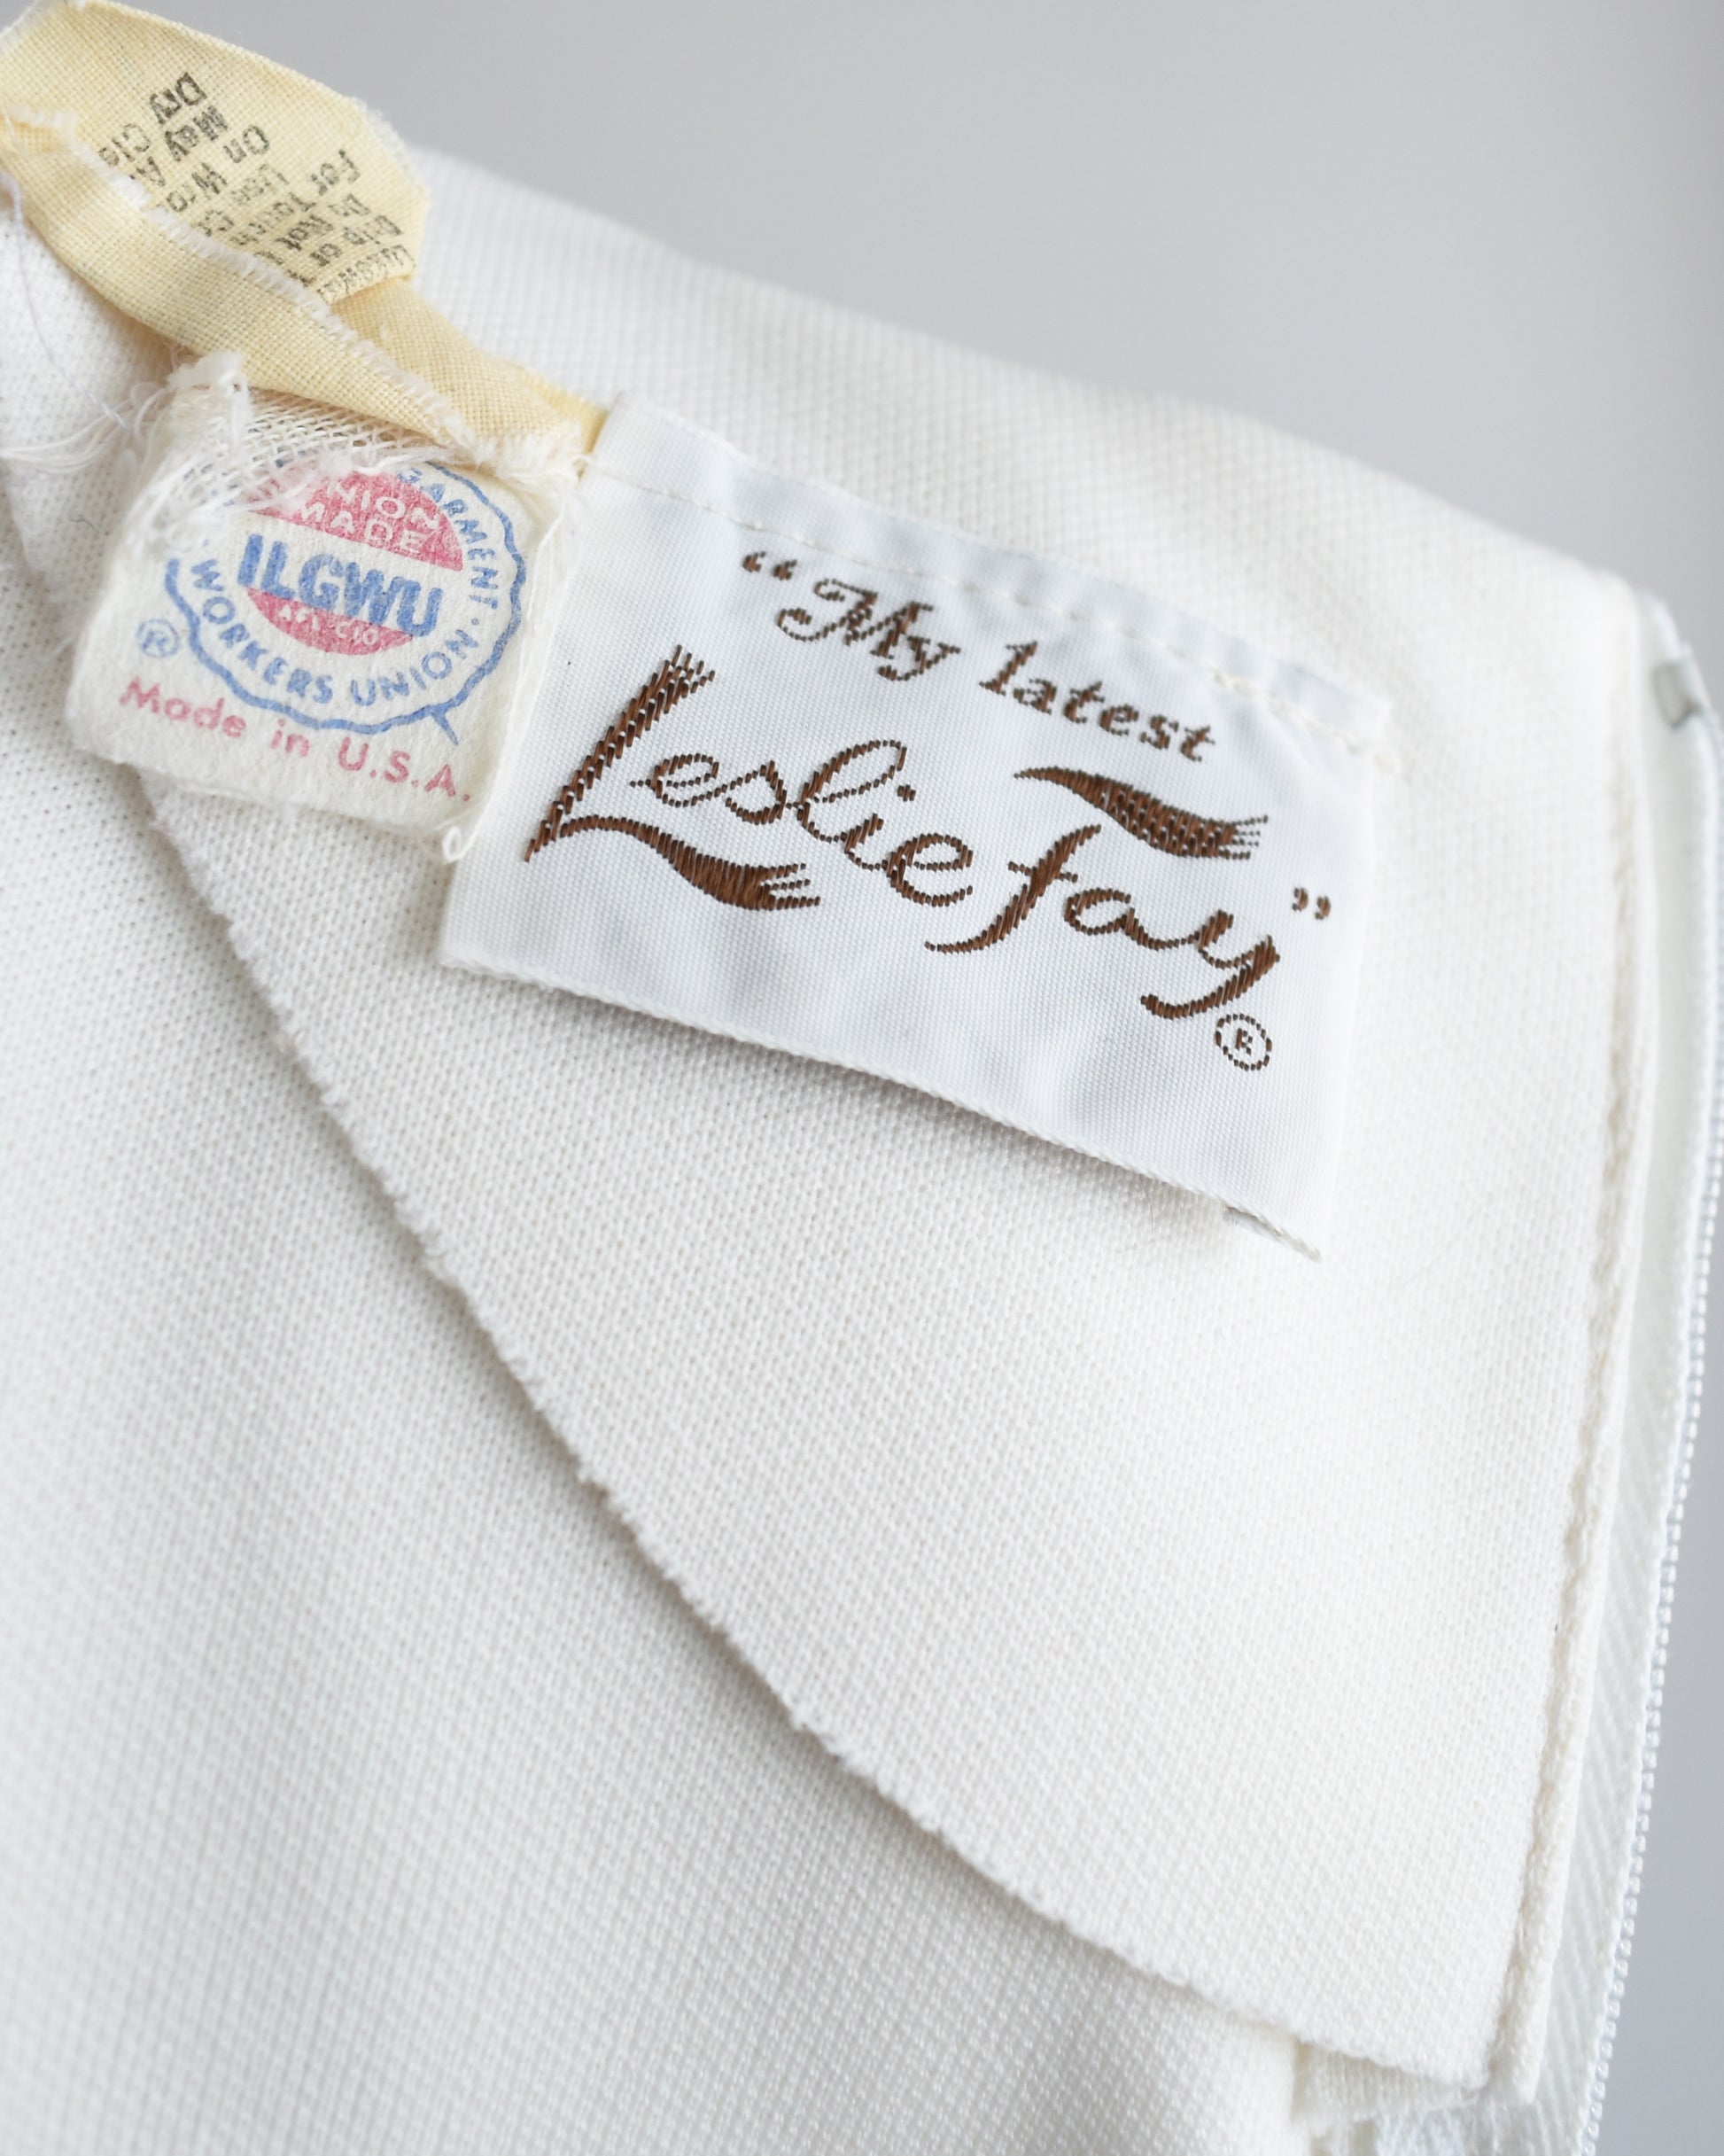 Close up of the tag which says My latest Leslie Fay